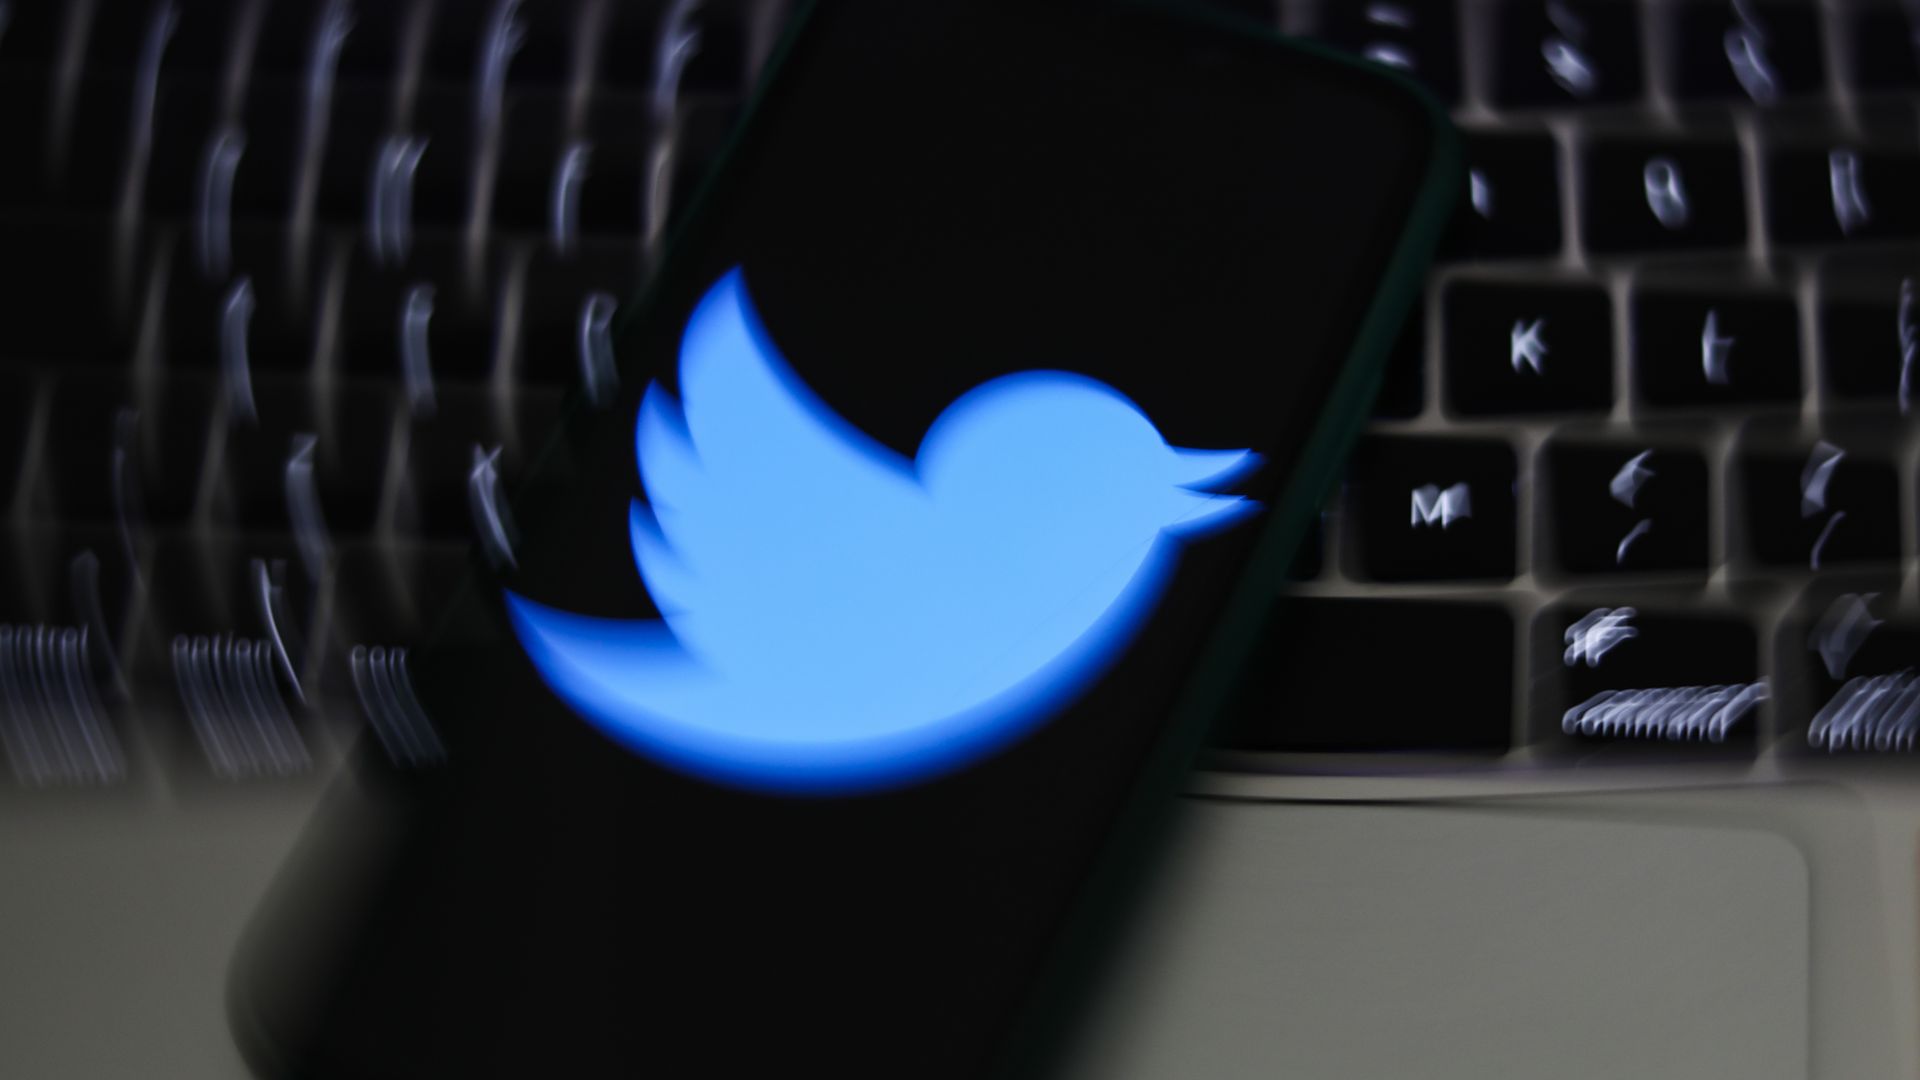 Photo illustration of a blurred Twitter logo on someone's phone